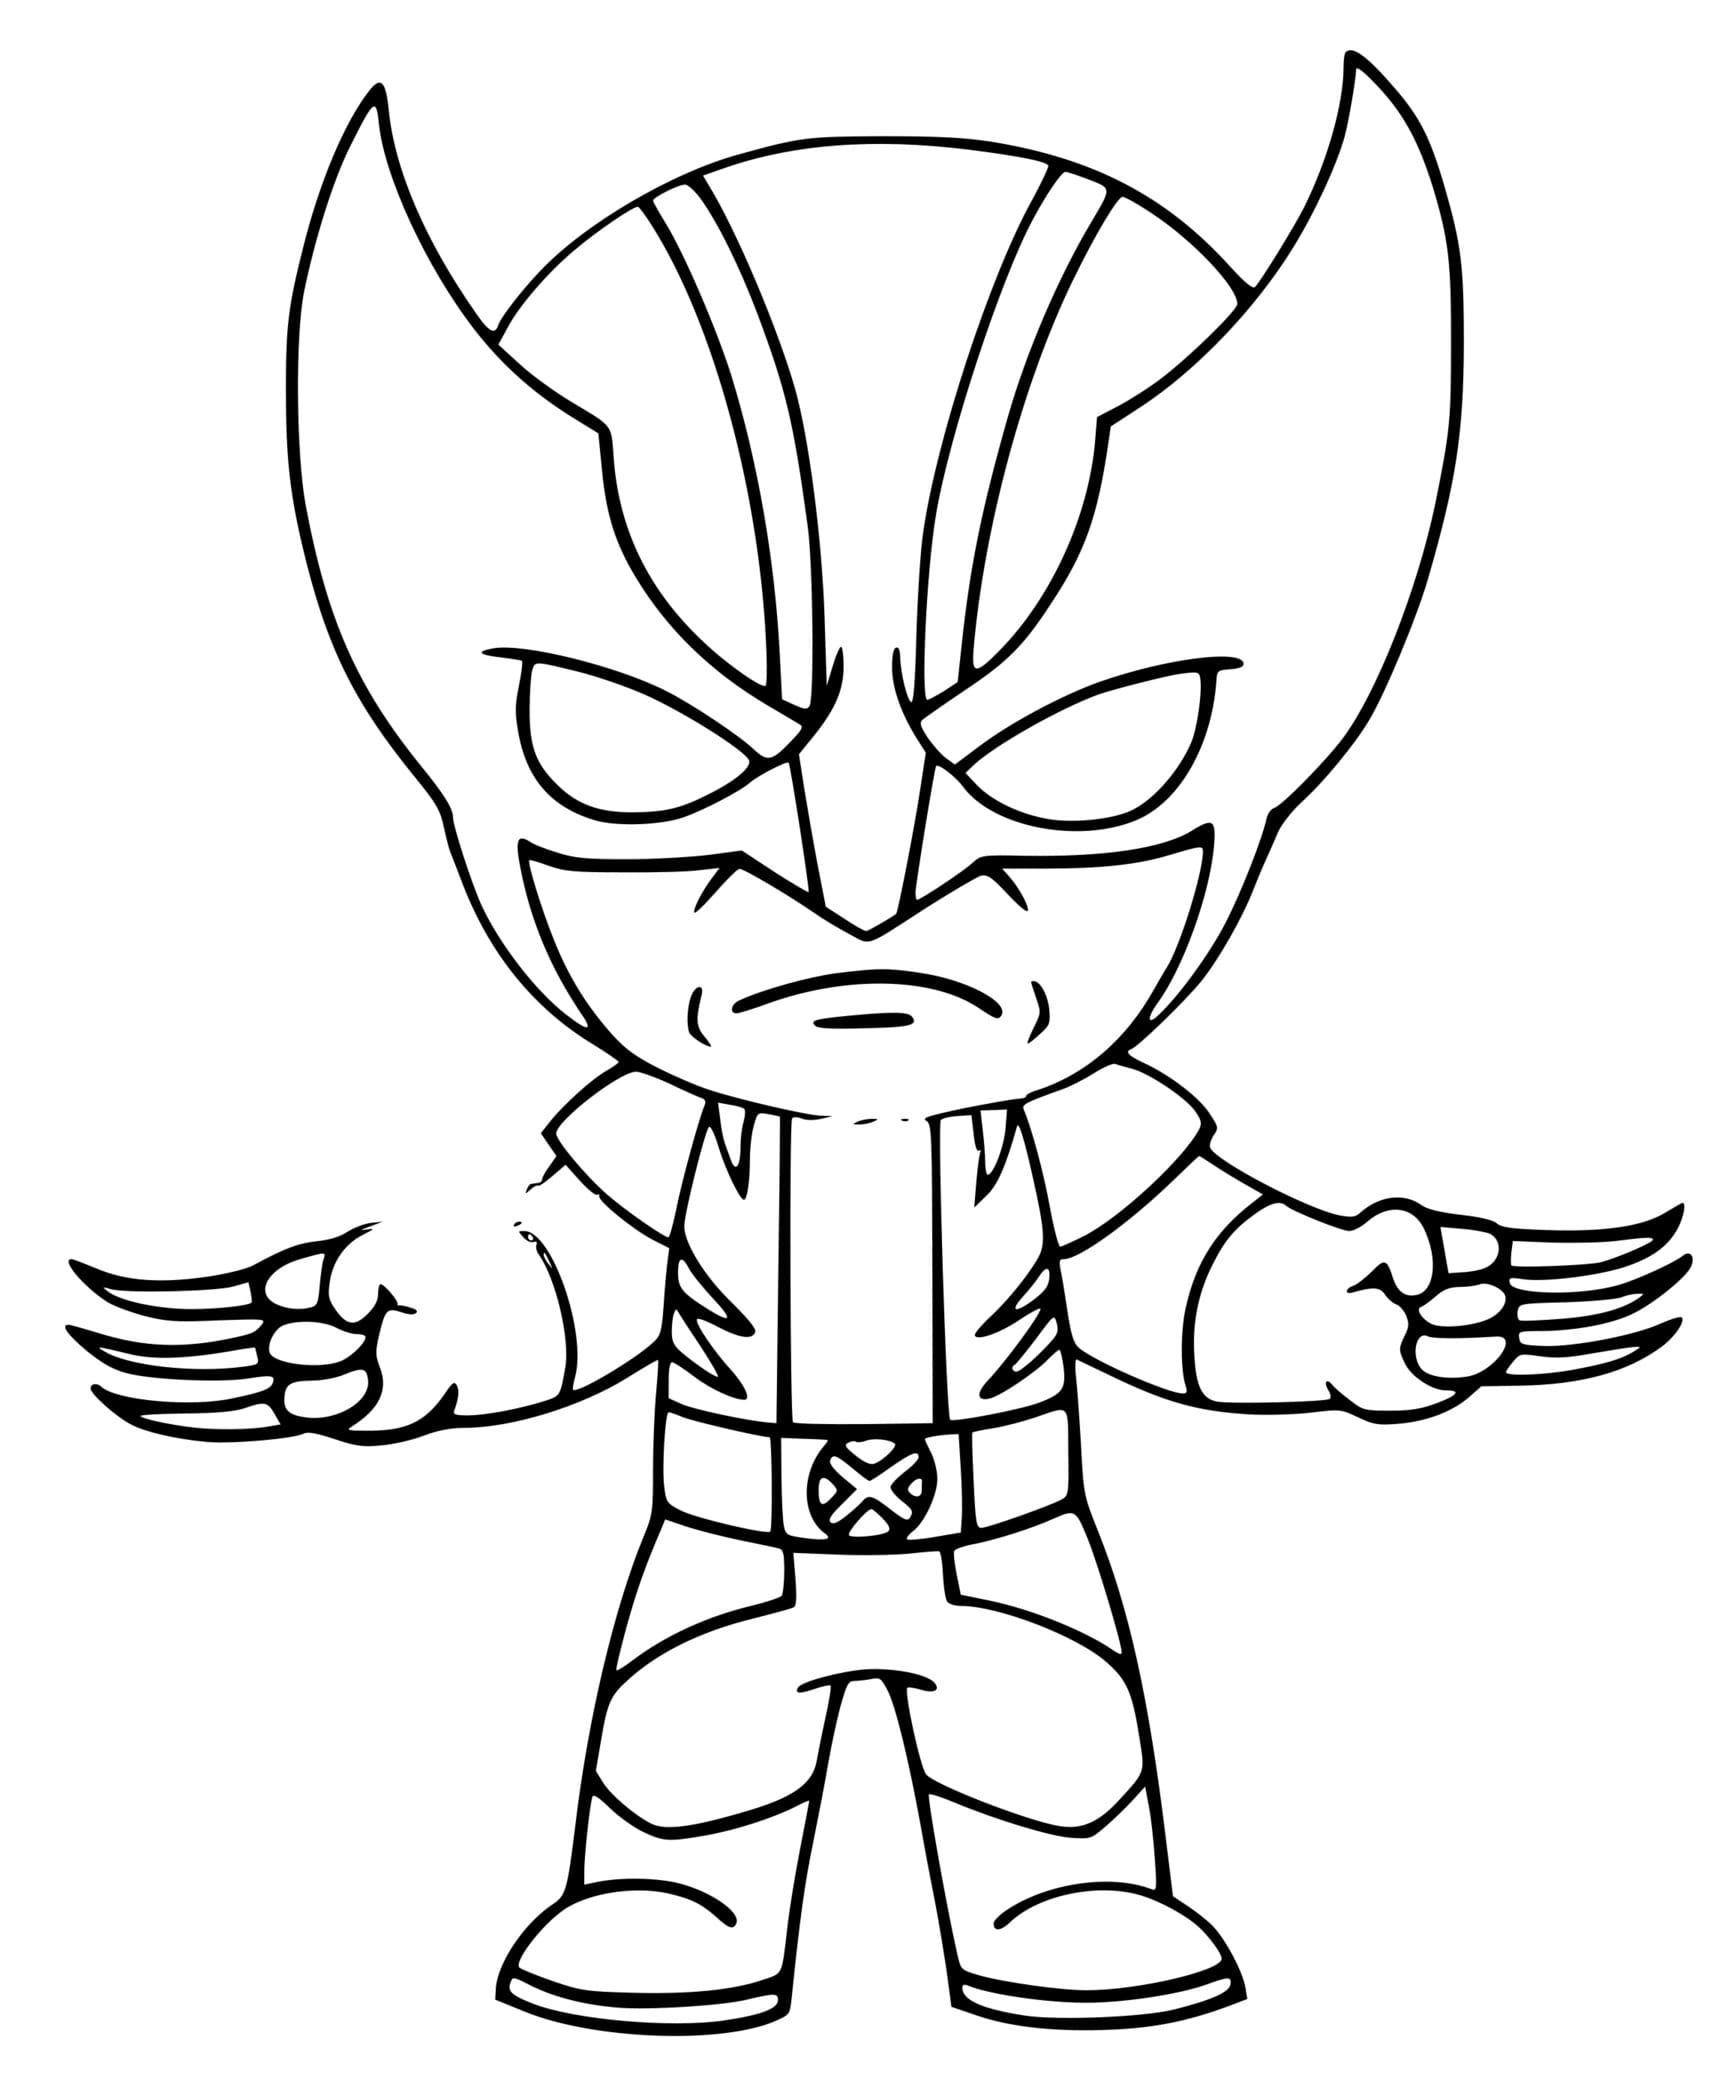 Wolverine Fortnite Coloring Page